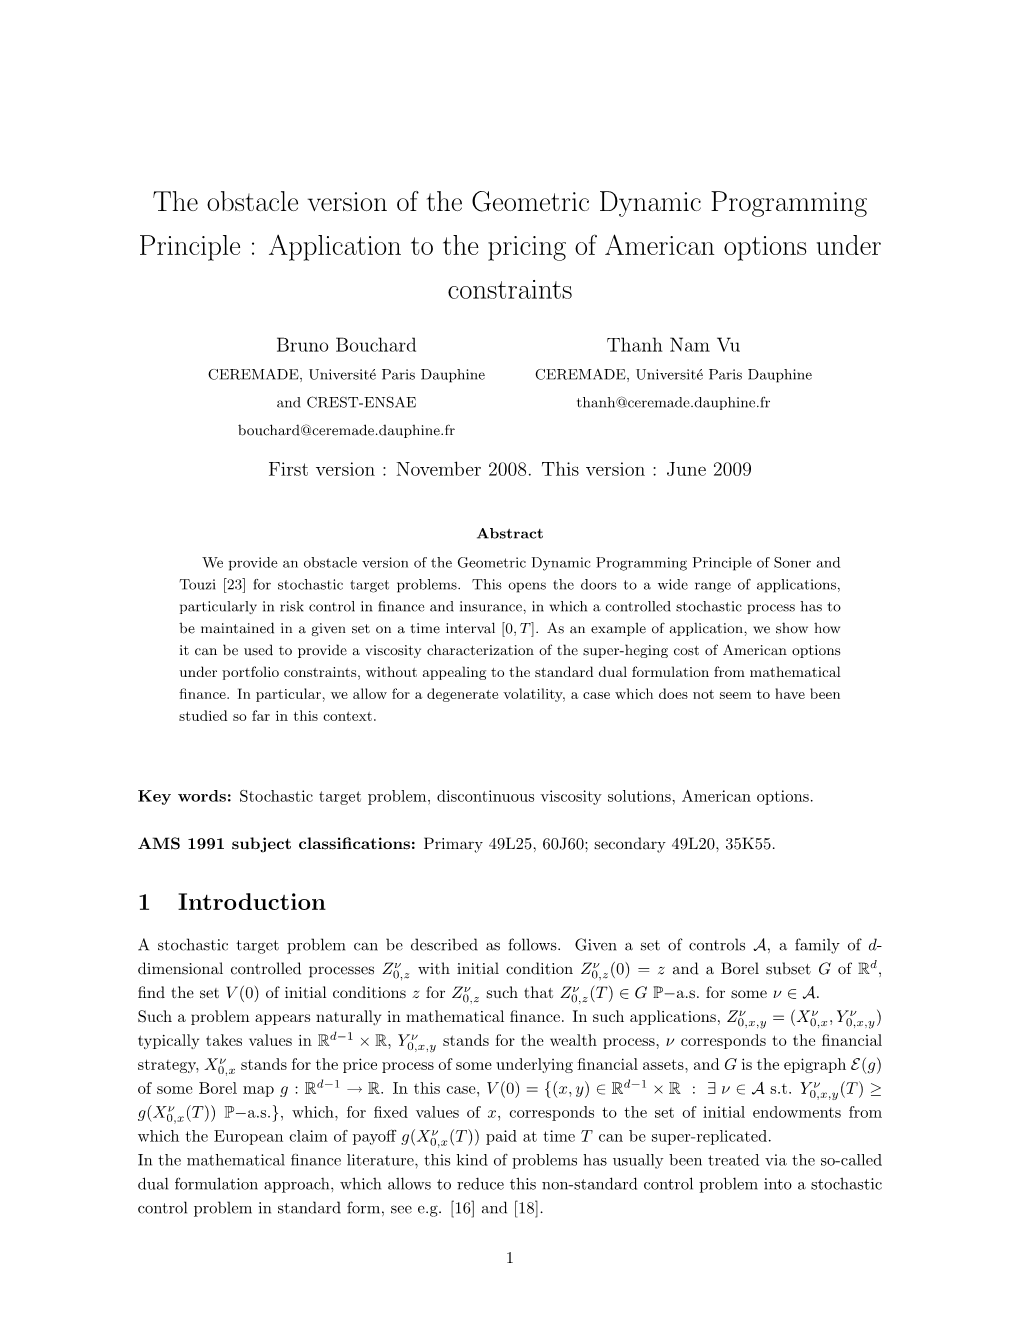 The Obstacle Version of the Geometric Dynamic Programming Principle : Application to the Pricing of American Options Under Constraints